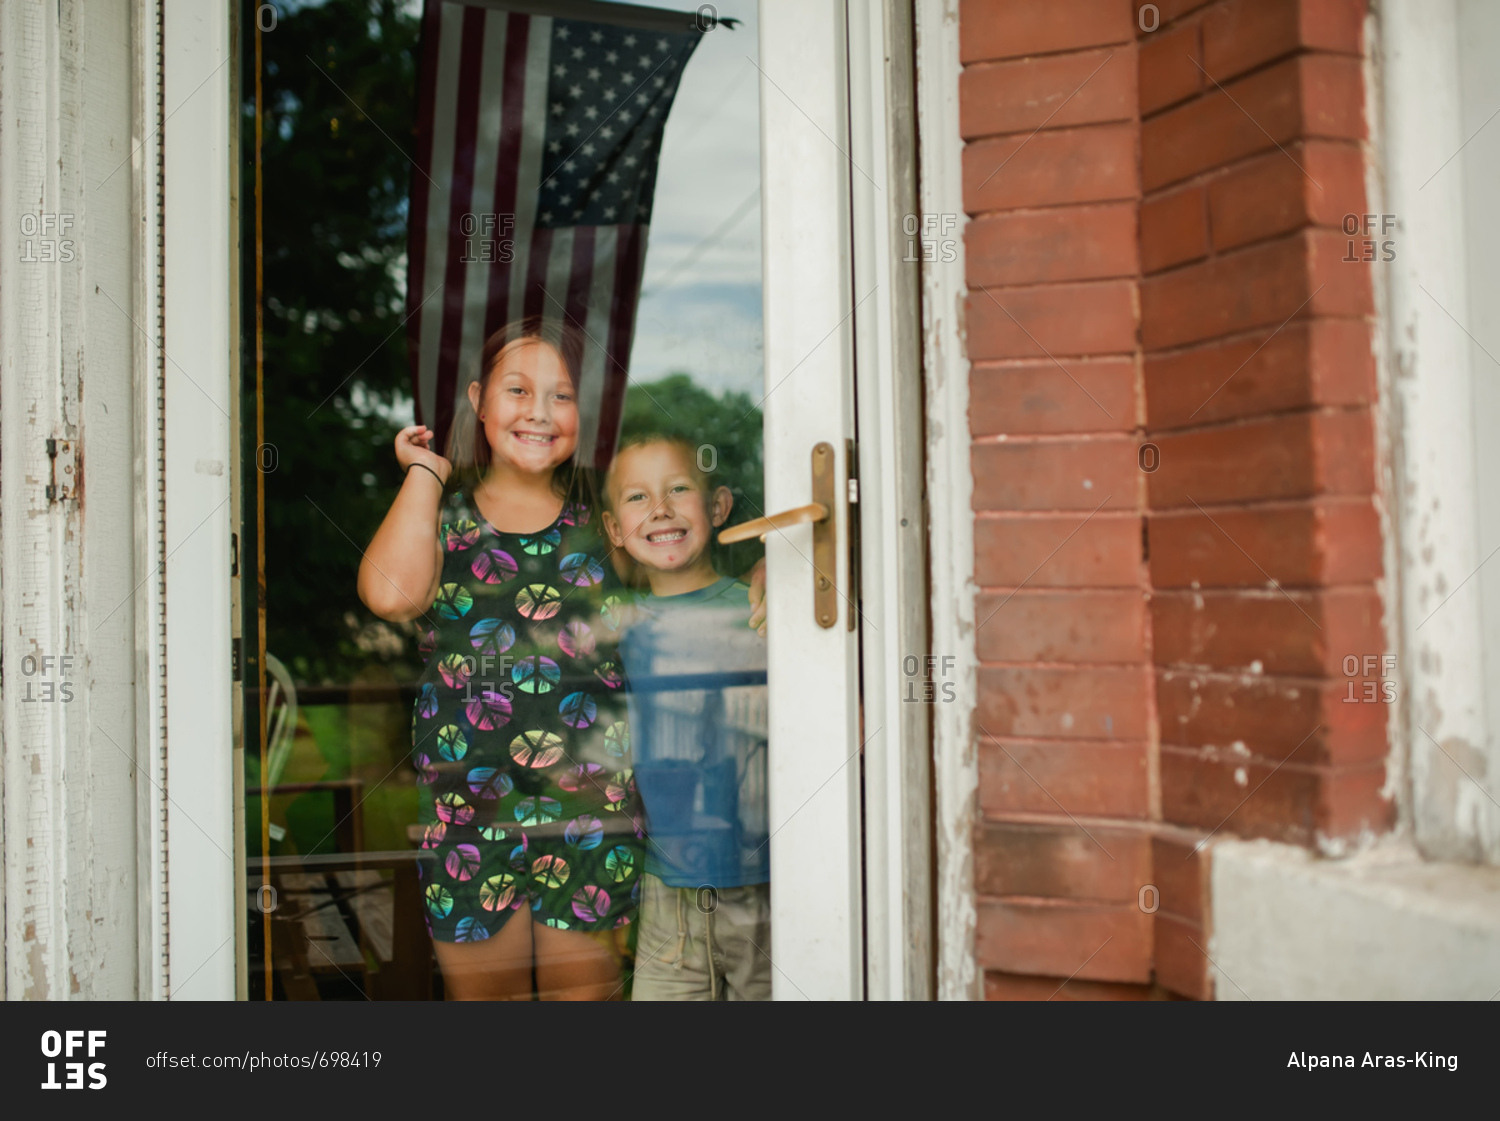 Portrait of children waving from a door in small town America